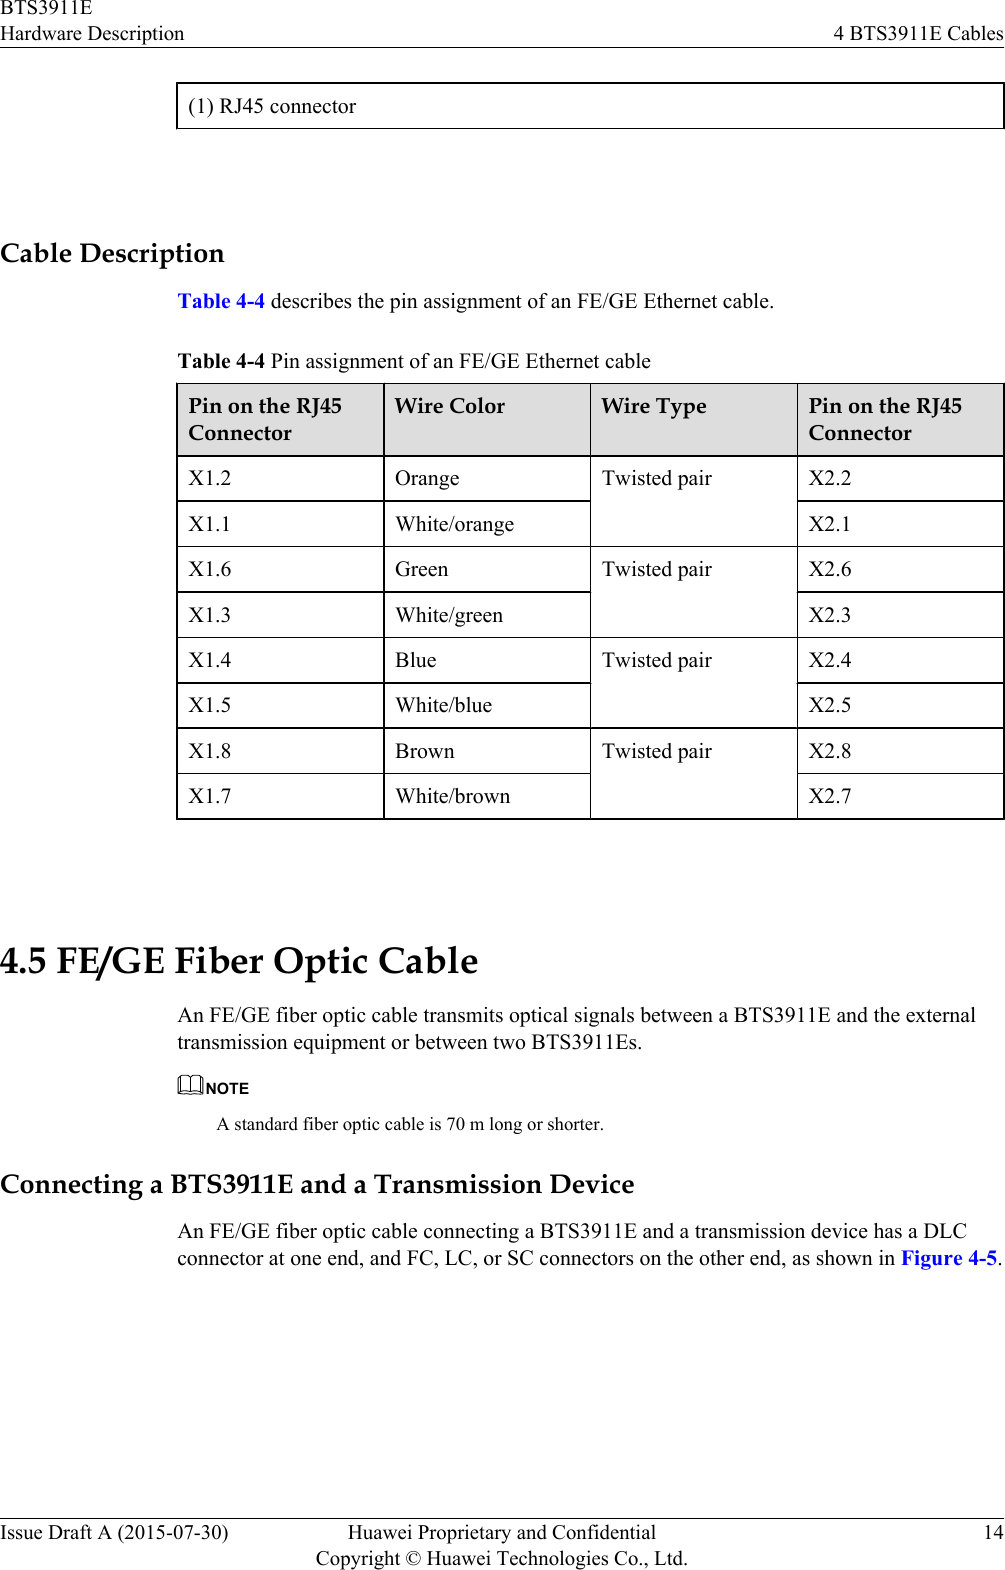 (1) RJ45 connector Cable DescriptionTable 4-4 describes the pin assignment of an FE/GE Ethernet cable.Table 4-4 Pin assignment of an FE/GE Ethernet cablePin on the RJ45ConnectorWire Color Wire Type Pin on the RJ45ConnectorX1.2 Orange Twisted pair X2.2X1.1 White/orange X2.1X1.6 Green Twisted pair X2.6X1.3 White/green X2.3X1.4 Blue Twisted pair X2.4X1.5 White/blue X2.5X1.8 Brown Twisted pair X2.8X1.7 White/brown X2.7 4.5 FE/GE Fiber Optic CableAn FE/GE fiber optic cable transmits optical signals between a BTS3911E and the externaltransmission equipment or between two BTS3911Es.NOTEA standard fiber optic cable is 70 m long or shorter.Connecting a BTS3911E and a Transmission DeviceAn FE/GE fiber optic cable connecting a BTS3911E and a transmission device has a DLCconnector at one end, and FC, LC, or SC connectors on the other end, as shown in Figure 4-5.BTS3911EHardware Description 4 BTS3911E CablesIssue Draft A (2015-07-30) Huawei Proprietary and ConfidentialCopyright © Huawei Technologies Co., Ltd.14